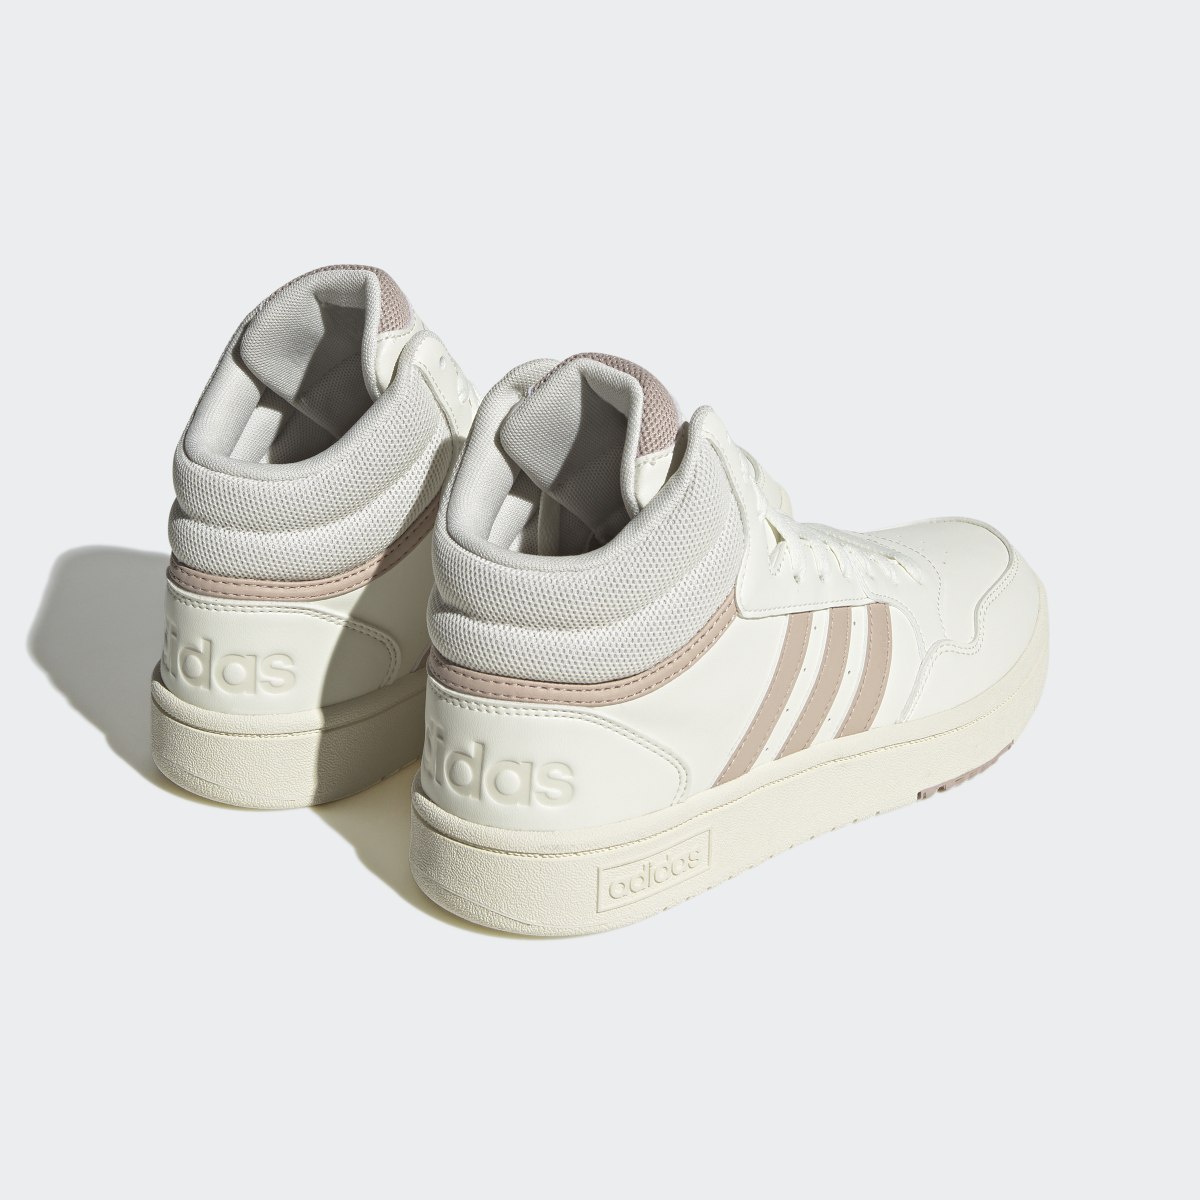 Adidas Hoops 3.0 Mid Classic Shoes. 6